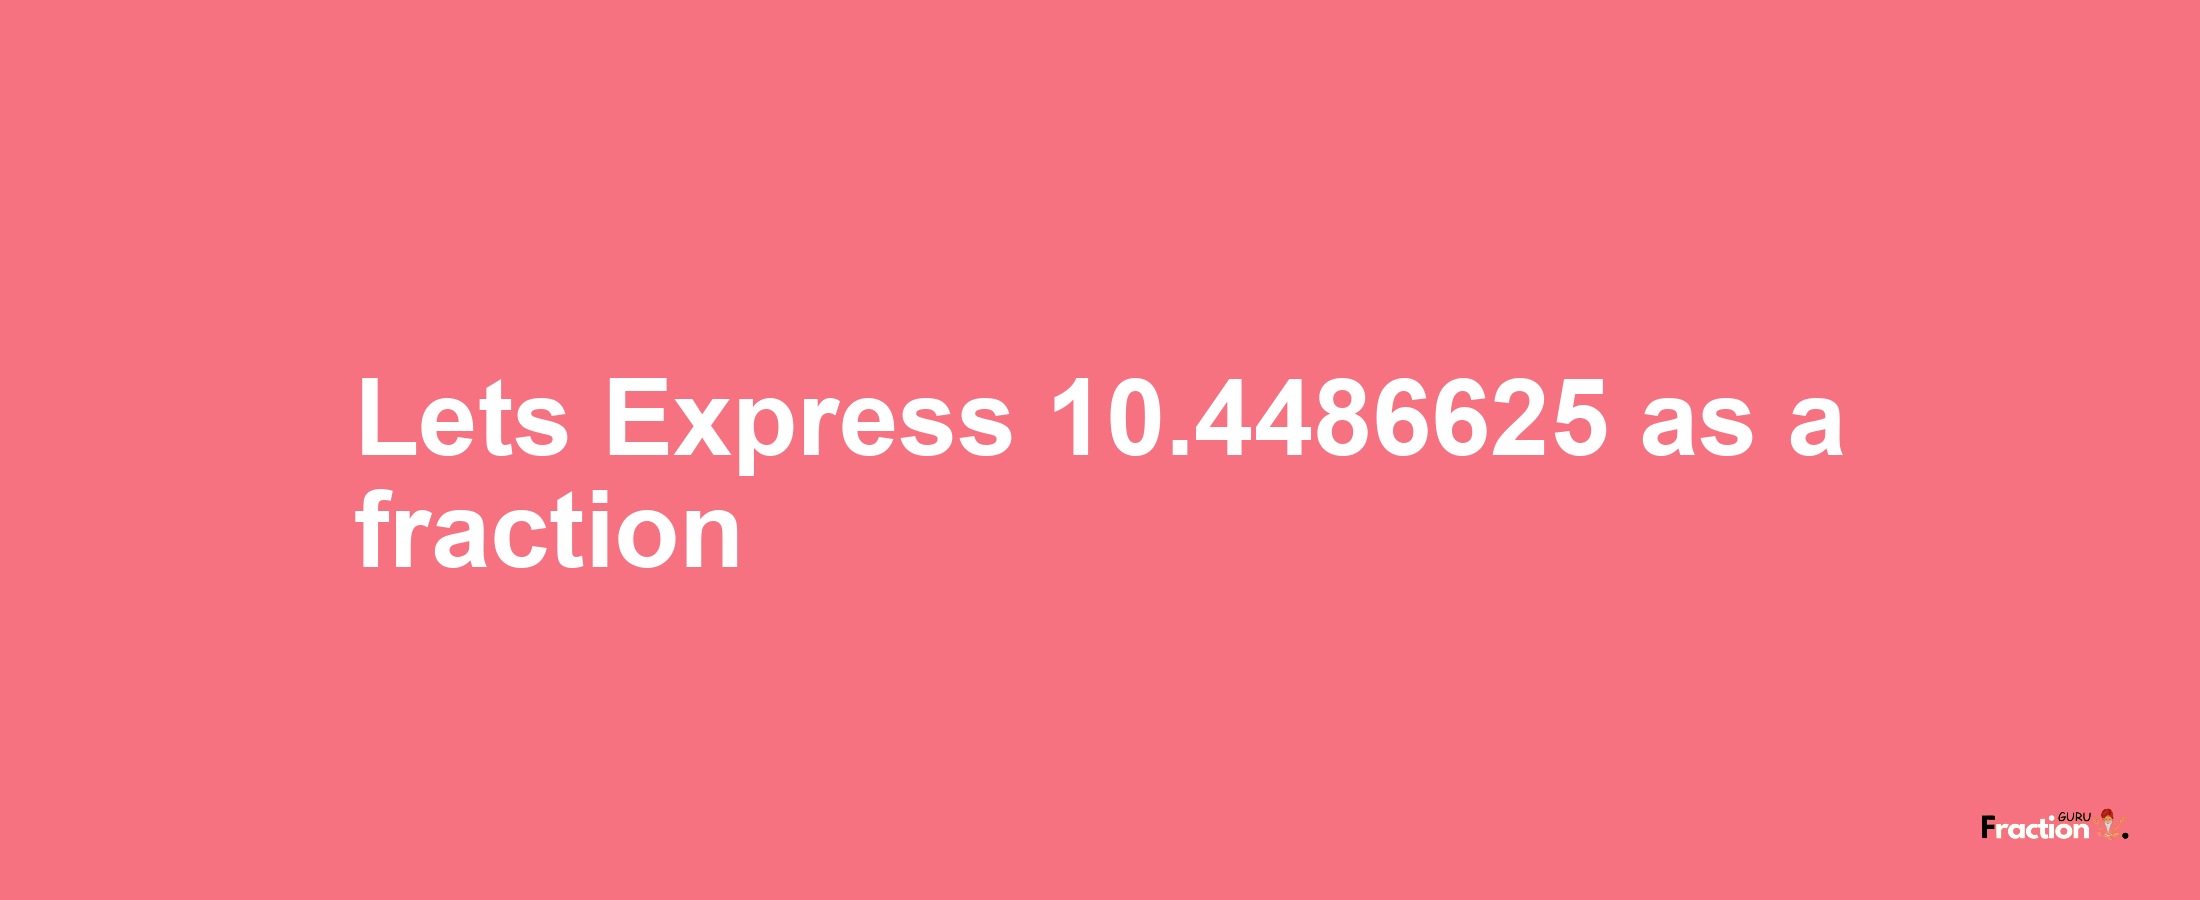 Lets Express 10.4486625 as afraction